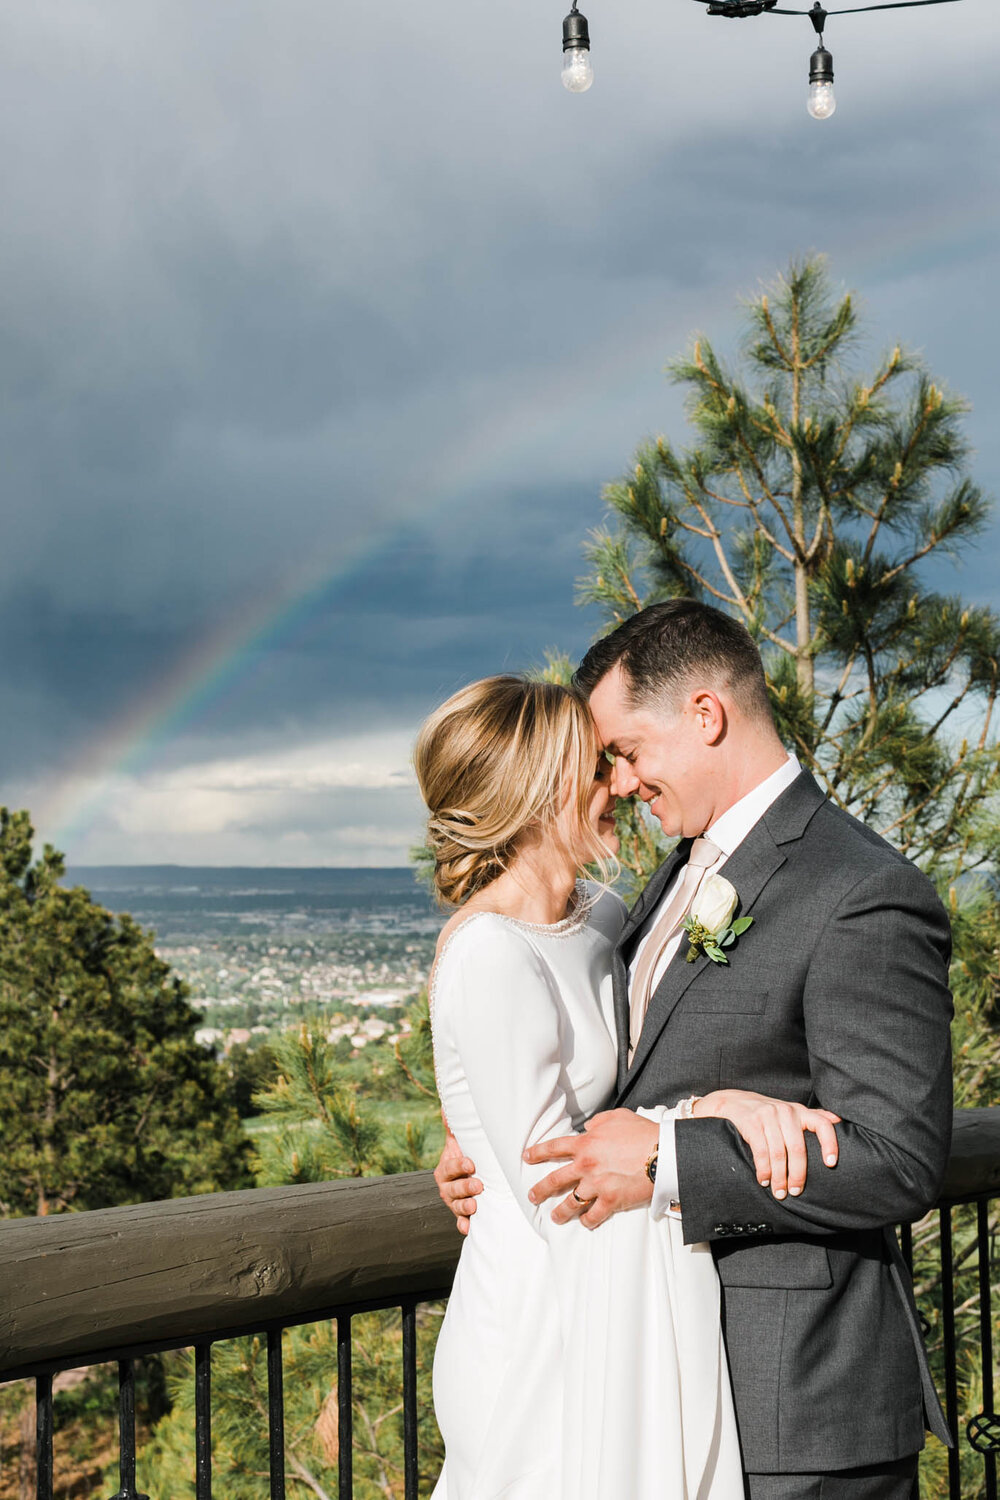 Immediately after the ceremony, this beautiful rainbow appeared across the sky.  Definitely a sign that these two were meant to be.